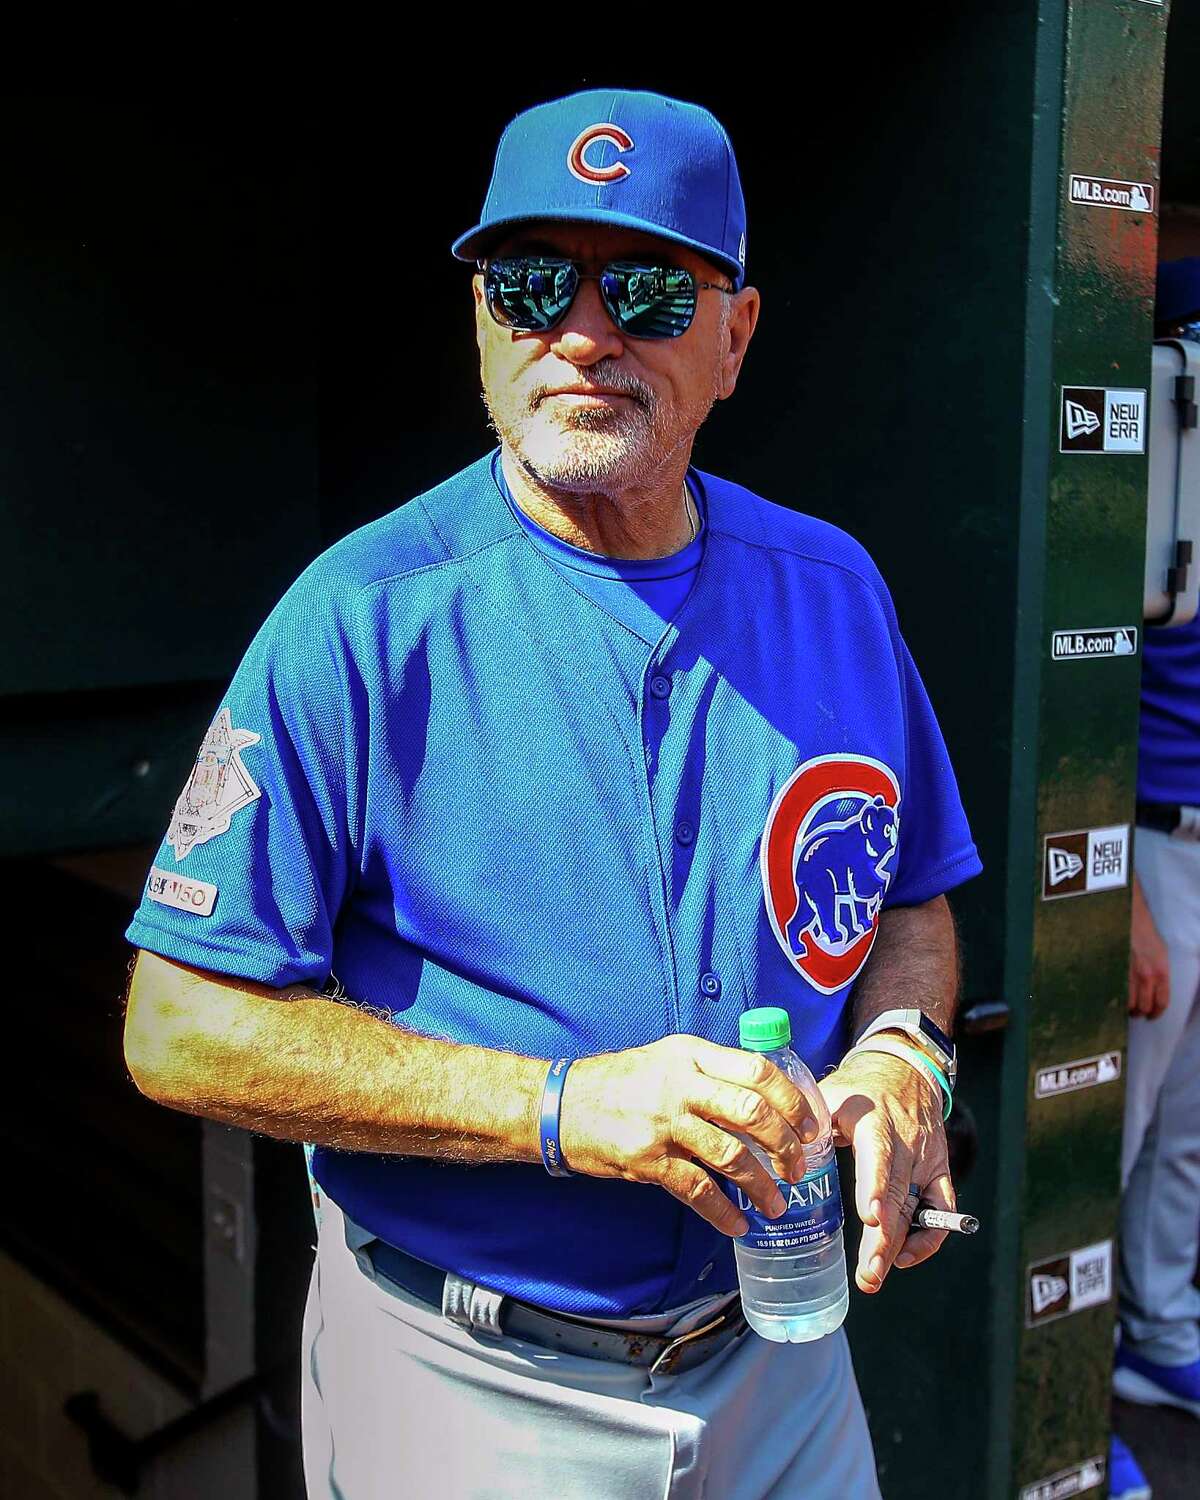 Chicago Cubs manager Joe Maddon looks out from the dugout prior to a baseball game against the St. Louis Cardinals, Sunday, Sept. 29, 2019, in St. Louis. (AP Photo/Scott Kane)